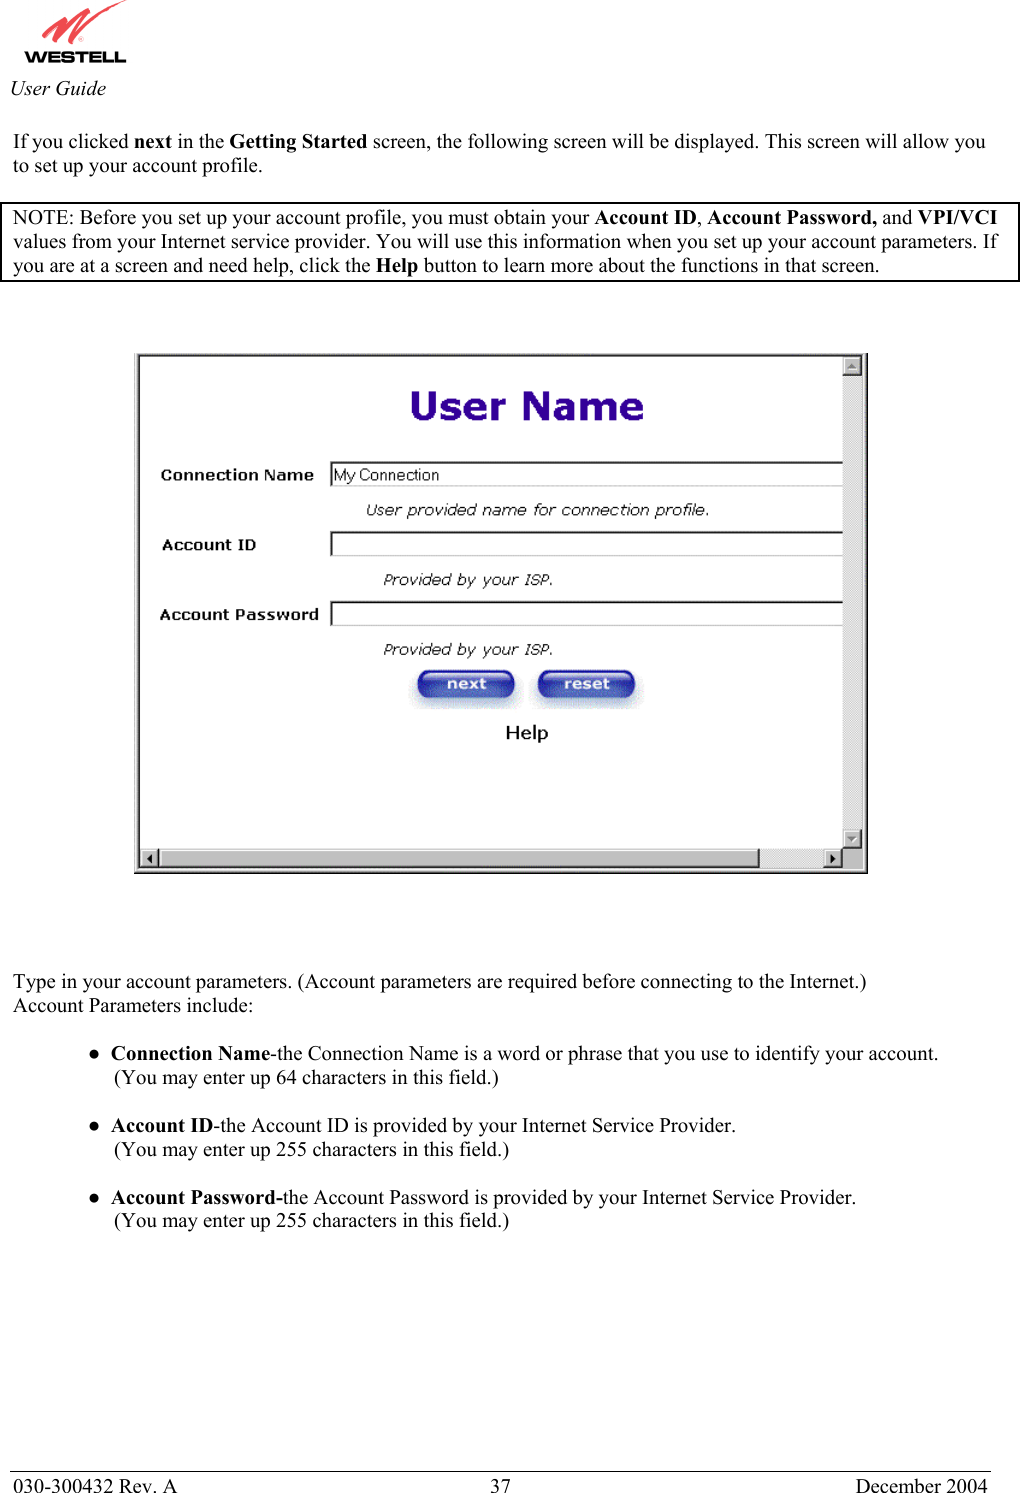       030-300432 Rev. A  37 December 2004  User Guide If you clicked next in the Getting Started screen, the following screen will be displayed. This screen will allow you to set up your account profile.  NOTE: Before you set up your account profile, you must obtain your Account ID, Account Password, and VPI/VCI values from your Internet service provider. You will use this information when you set up your account parameters. If you are at a screen and need help, click the Help button to learn more about the functions in that screen.         Type in your account parameters. (Account parameters are required before connecting to the Internet.)  Account Parameters include:  ●  Connection Name-the Connection Name is a word or phrase that you use to identify your account.       (You may enter up 64 characters in this field.)   ●  Account ID-the Account ID is provided by your Internet Service Provider.      (You may enter up 255 characters in this field.)  ●  Account Password-the Account Password is provided by your Internet Service Provider.      (You may enter up 255 characters in this field.)        